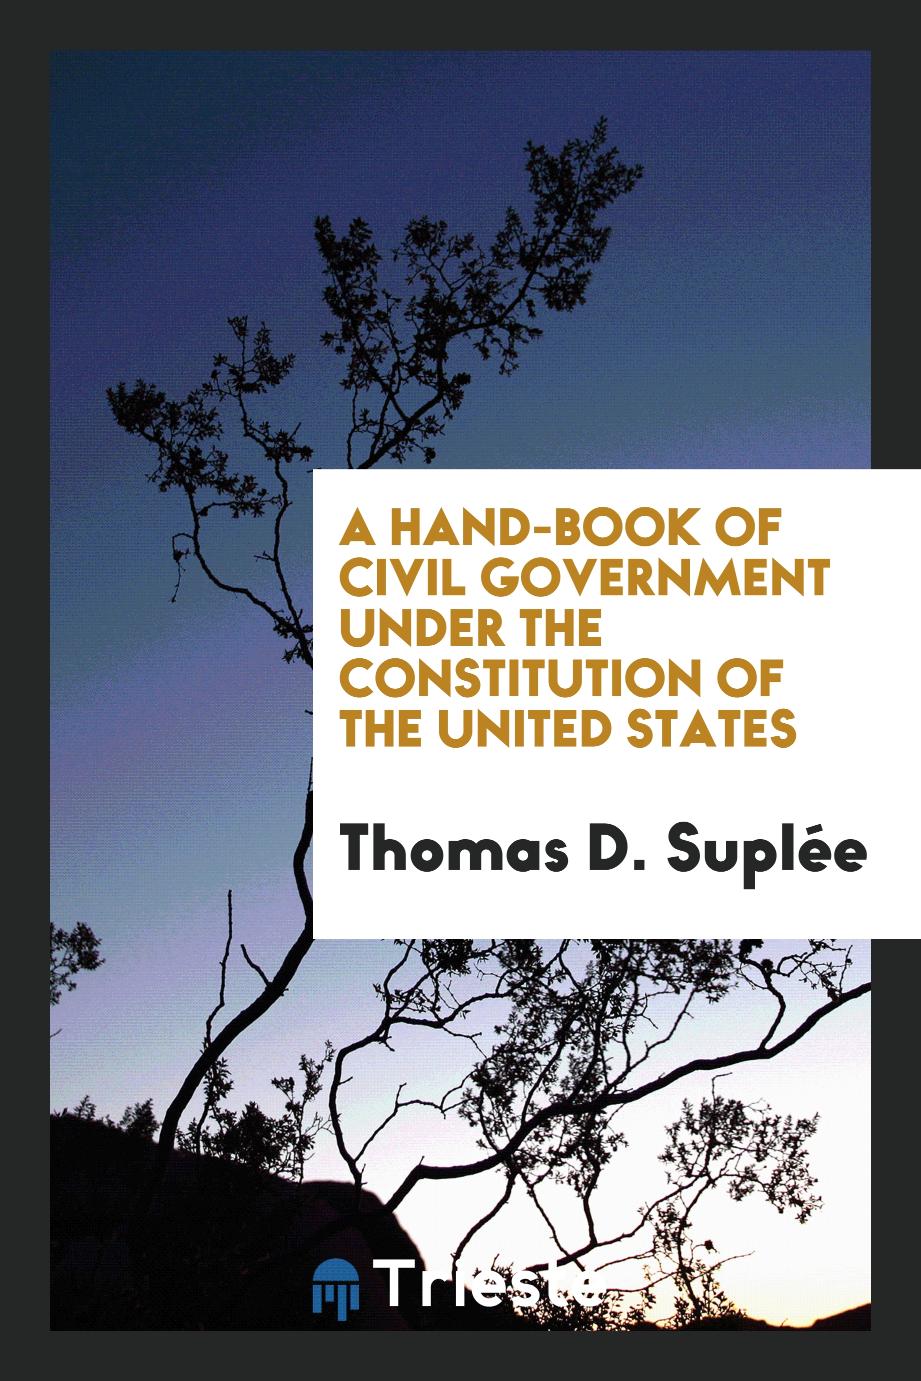 A hand-book of civil government under the Constitution of the United States